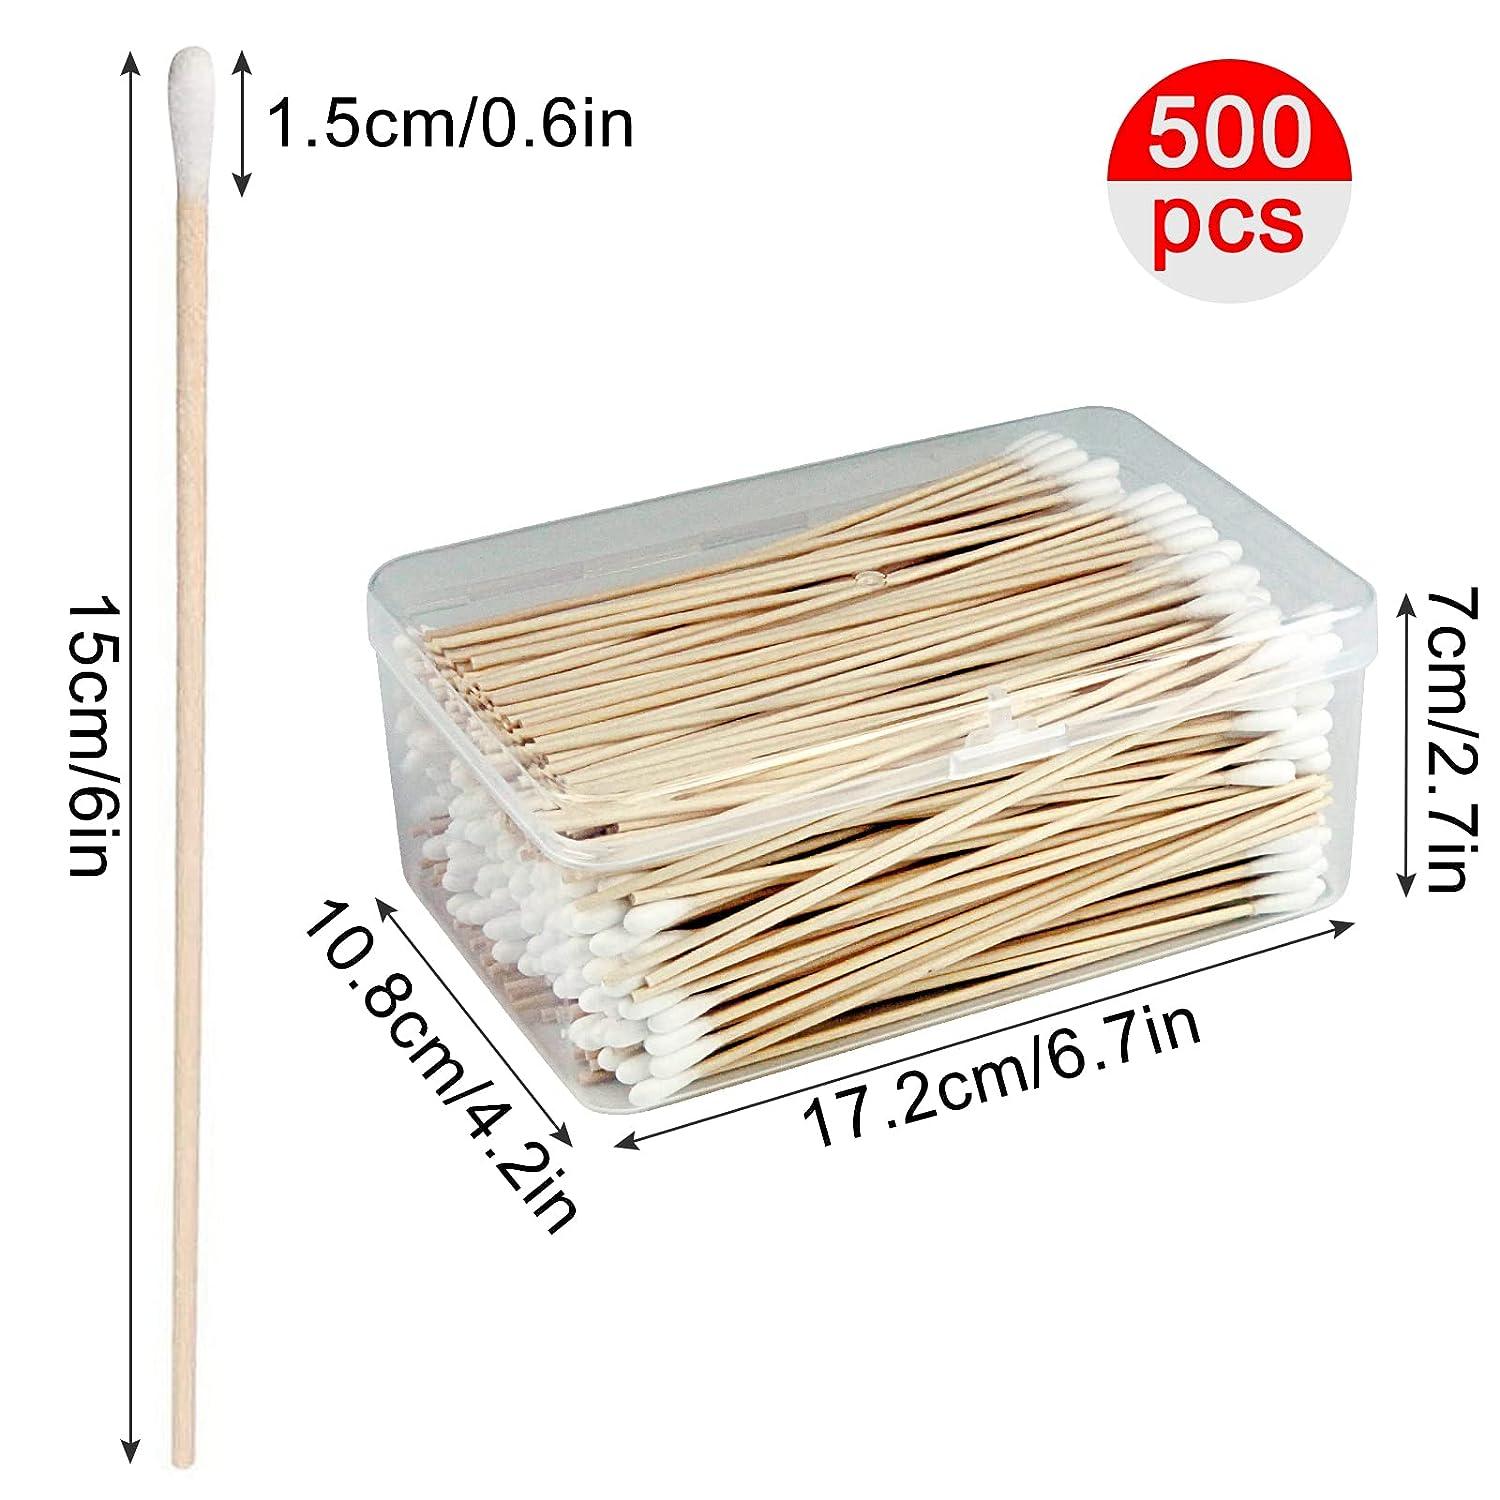 500 PCS 6 Inch Long Cotton Swabs With Reusable Box - 100% Natural  Eco-friendly Cotton Swabs With Wooden Sticks - Non Sterile Cotton Tipped  Applicators For Ear & Gun Cleaning, Makeup Remover